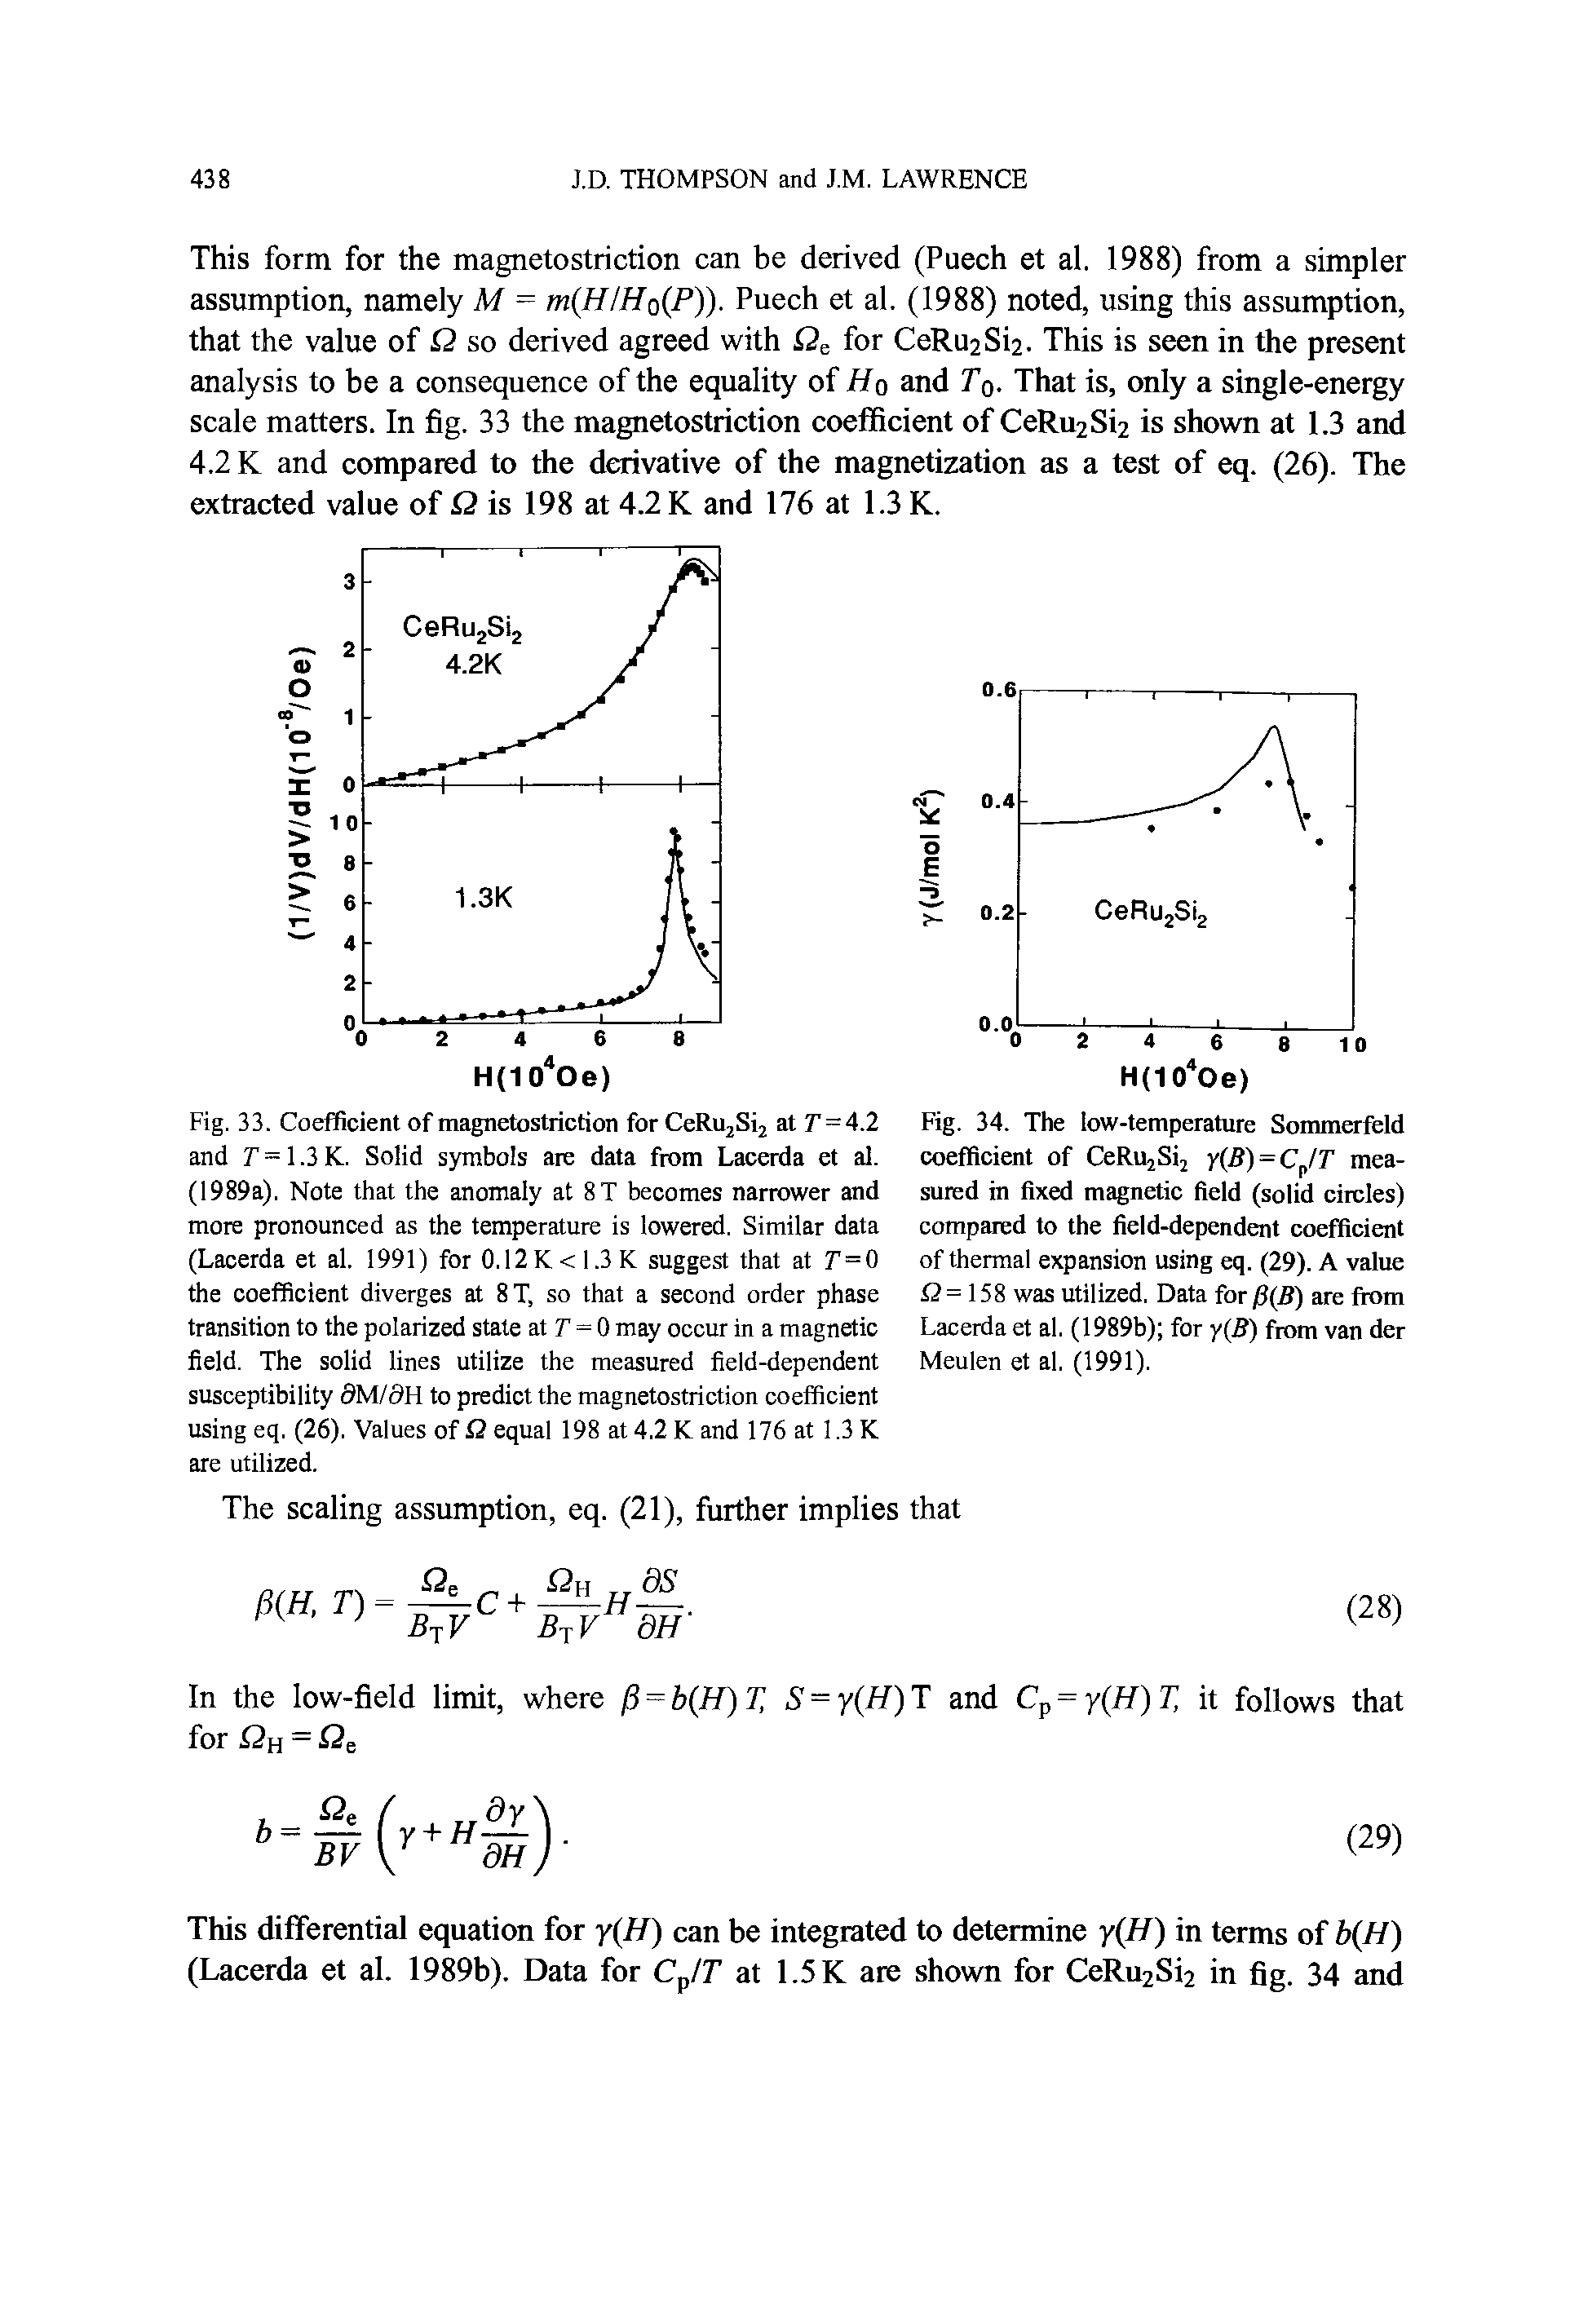 Fig. 33. Coefficient of magnetostriction for CeRUjSij at 7 = 4.2 and 7 =1.3K. Solid symbols are data from Lacerda et al. (1989a). Note that the anomaly at 8T becomes narrower and more pronounced as the temperature is lowered. Similar data (Lacerda et al. 1991) for 0.12K<I.3K suggest that at T = 0 the coefficient diverges at 8T, so that a second order phase transition to the polarized state at T = 0 may occur in a magnetic field. The solid lines utilize the measured field-dependent susceptibility 9M/9H to predict the magnetostriction coefficient using eq. (26). Values of Q equal 198 at 4.2 K and 176 at 1.3 K are utilized.